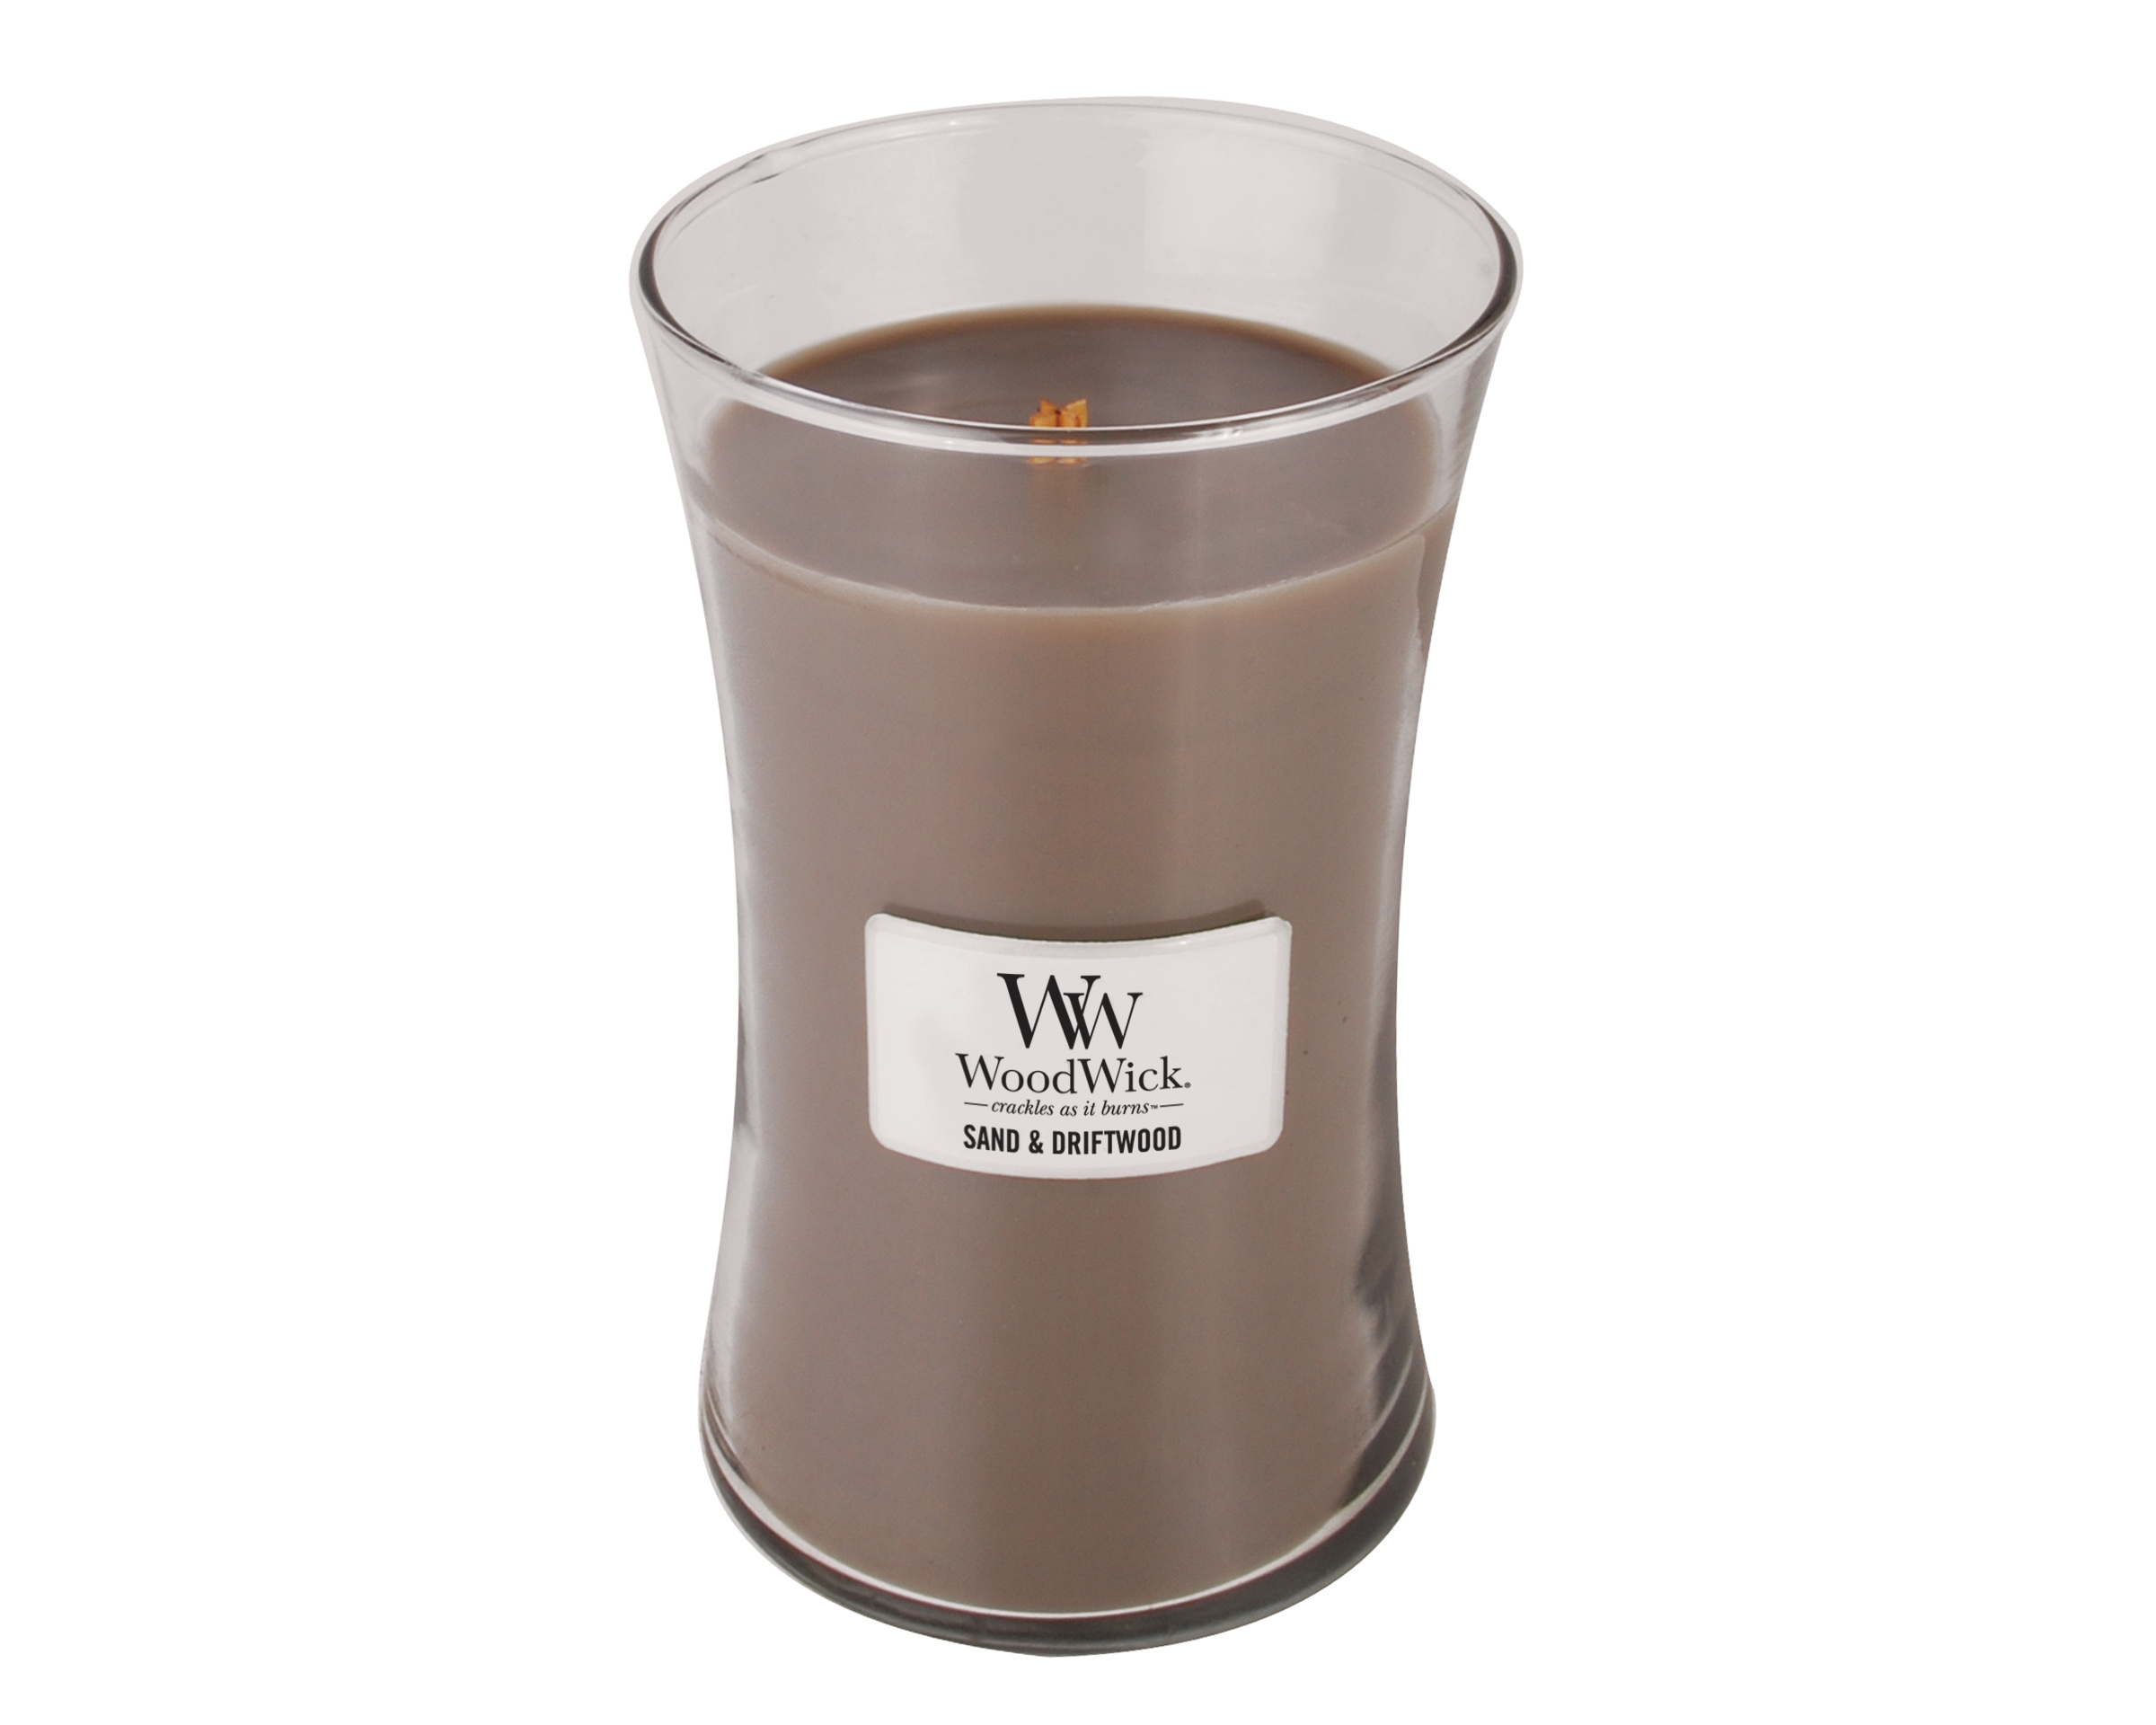 https://www.warentuin.nl/media/catalog/product/S/C/SCAN5038581054759_2_woodwick_home_fragrance_sand___driftwood_large_candle_woodw_7b62.jpg